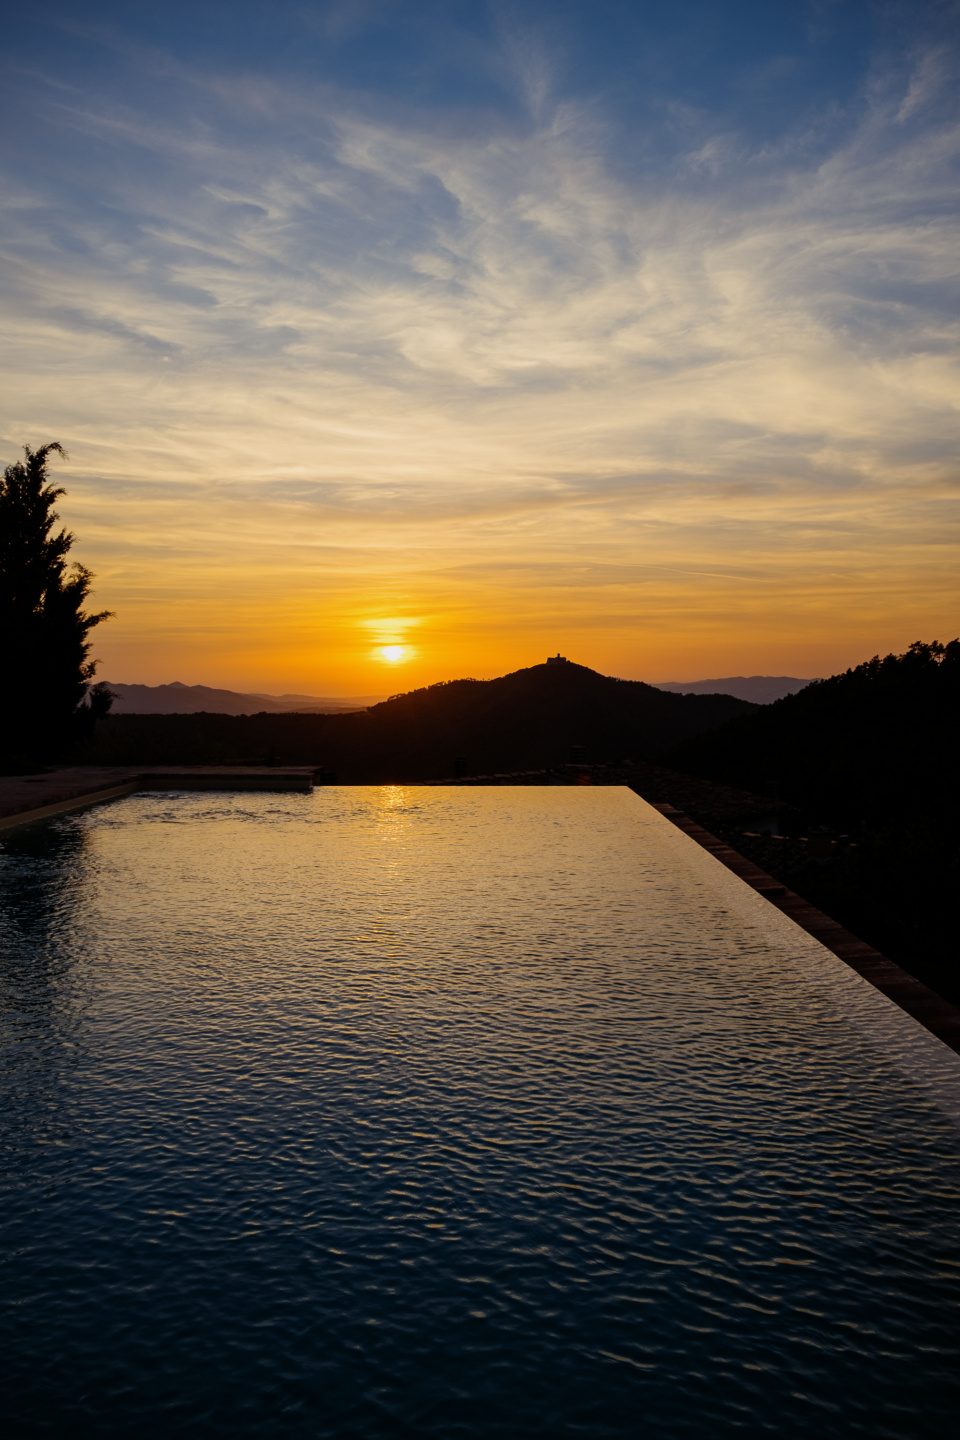 Infinity pool at sunset